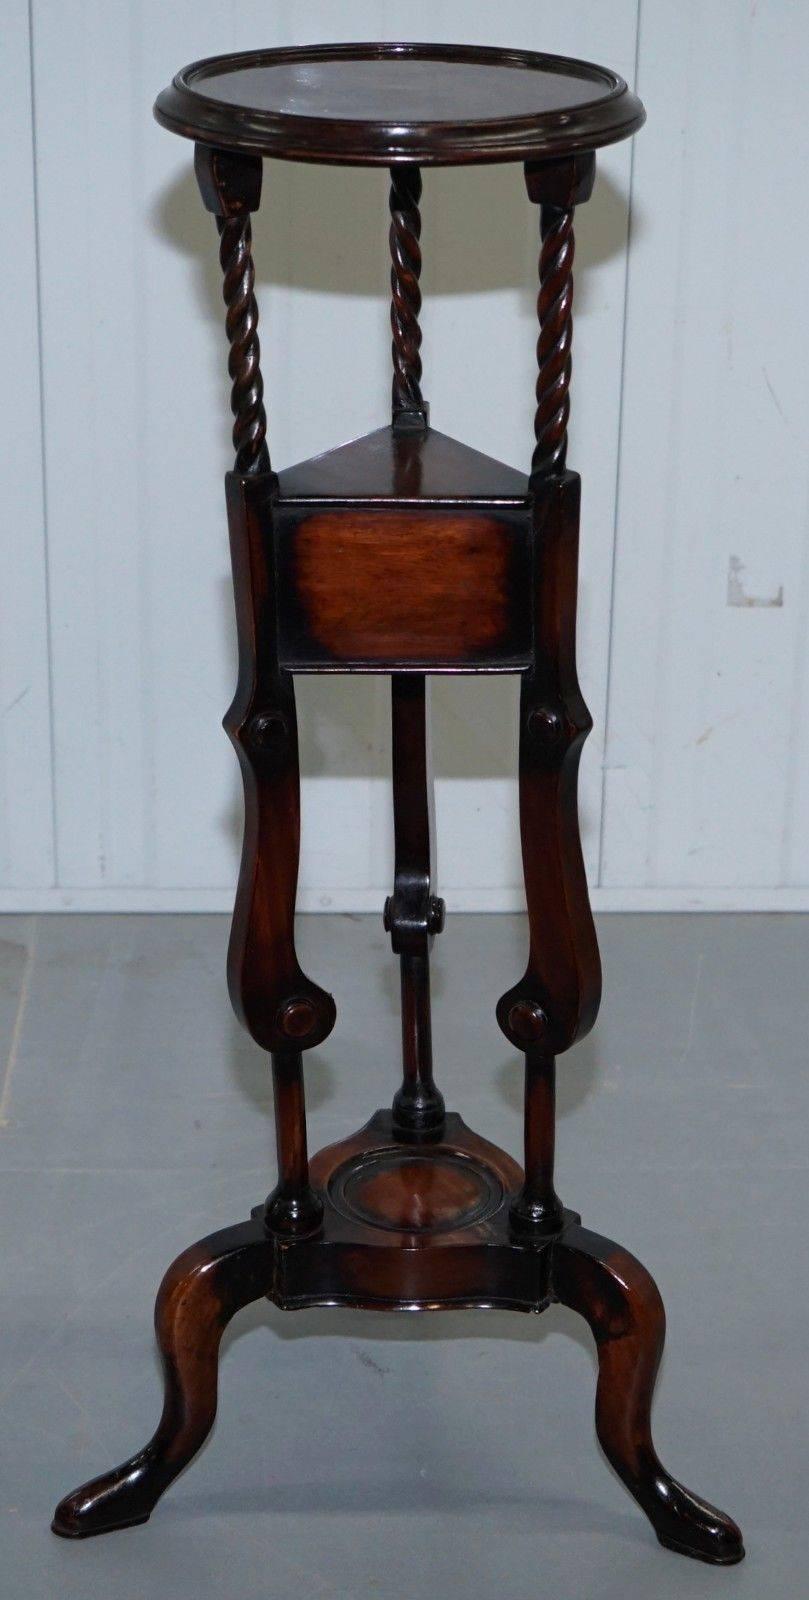 We are delighted to offer for sale one of two lovely George III style hand made from English mahogany lamp table or jardinière stand

A very good looking and well-made piece, the drawers as mentioned are faux so for display only 

We have deep